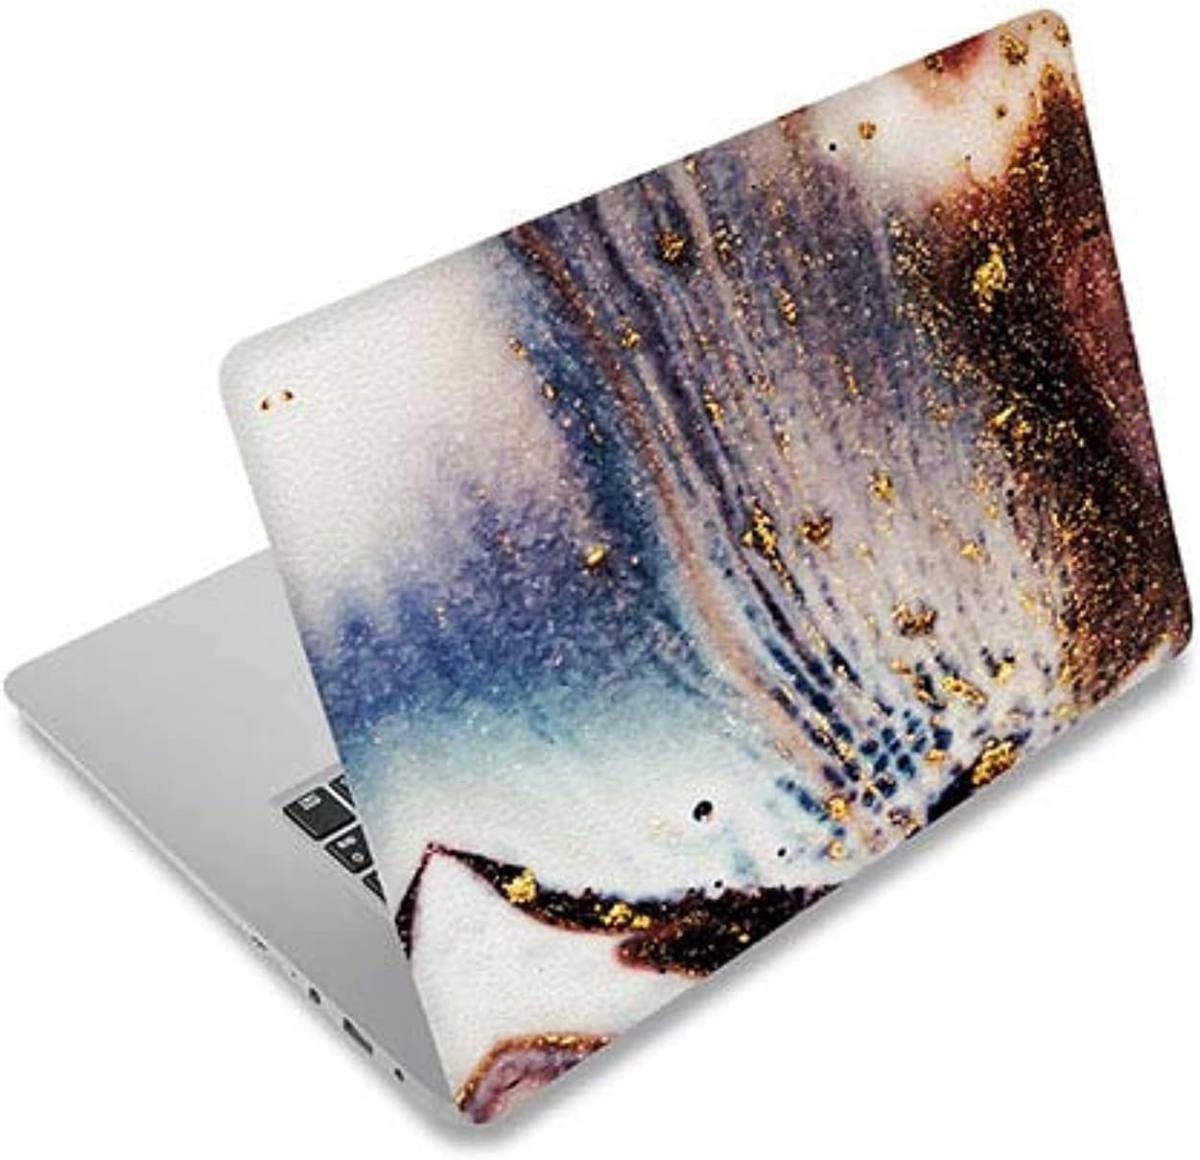 15.6 inch Laptop Notebook Skin Sticker Cover Art Decal Fits 13.3 14 15.4  15.6 HP Dell Lenovo Apple Mac Asus Acer (Free 2 Wrist Pad Included)